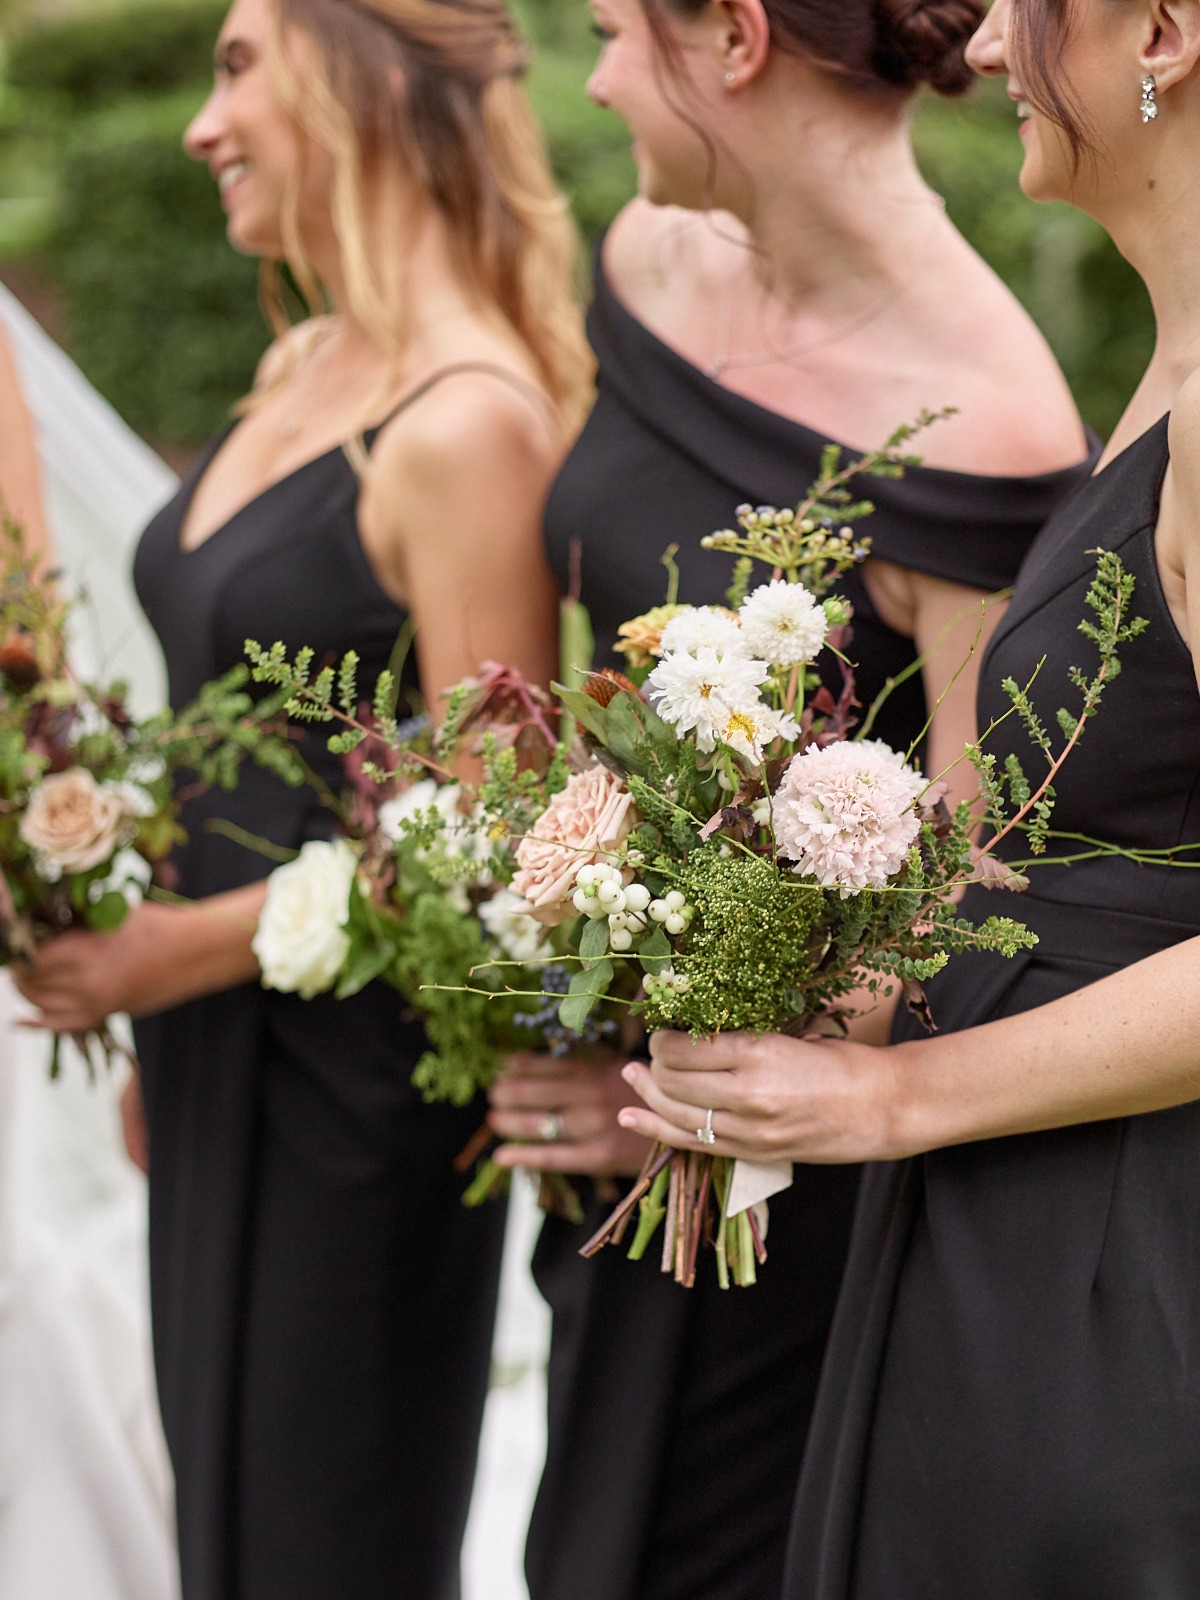 Close-up of bridesmaids holding bouquets